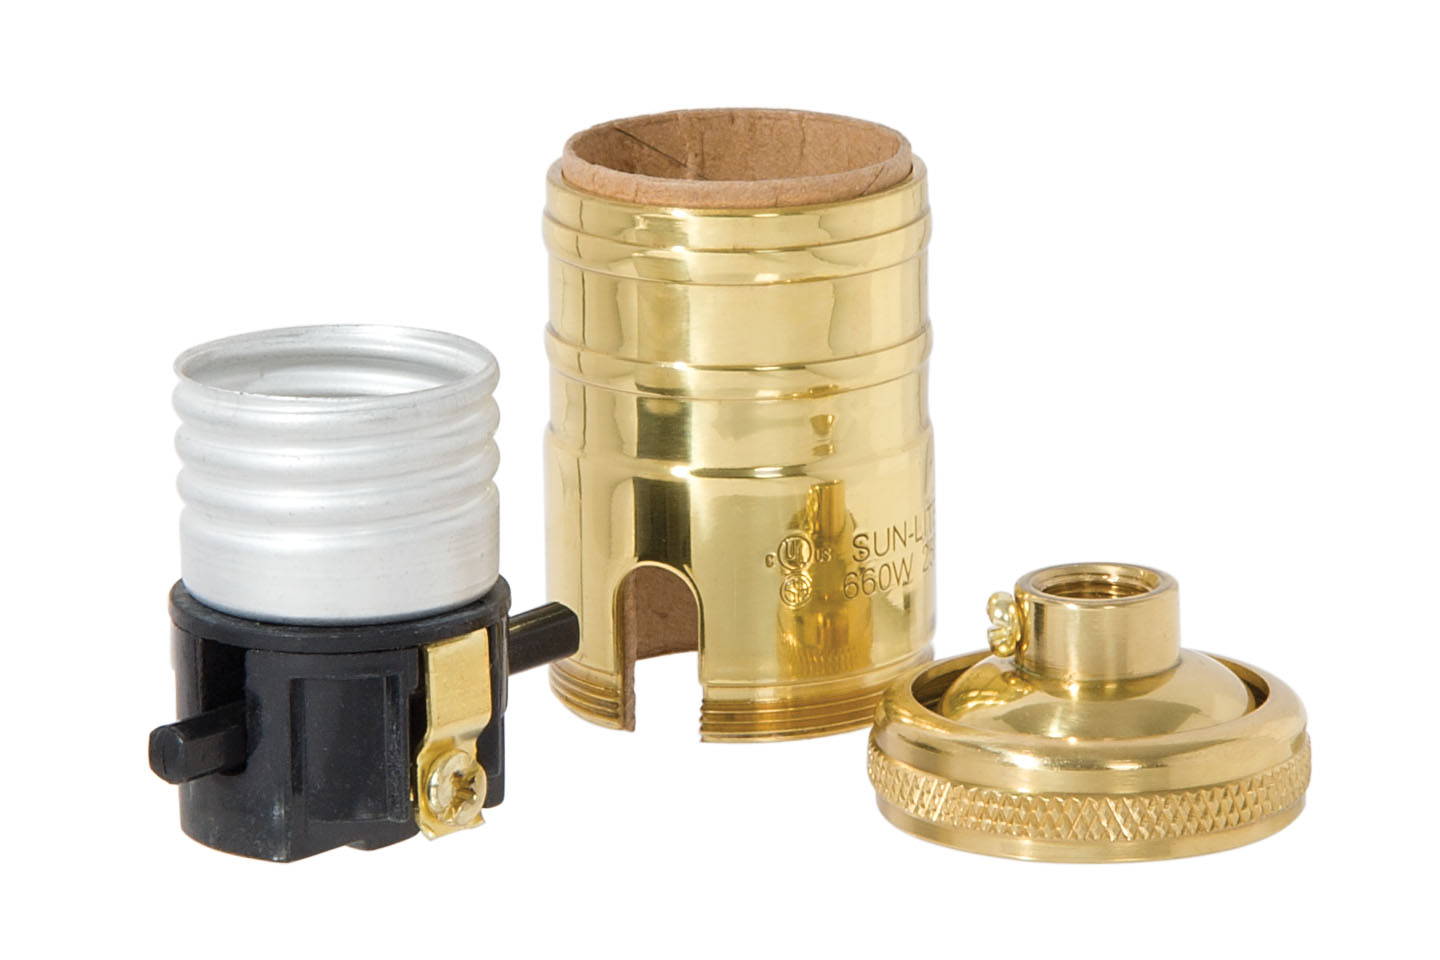 Heavy Turned Brass Socket with Polished & Lacquered Finish, Push-Thru function, No UNO threads